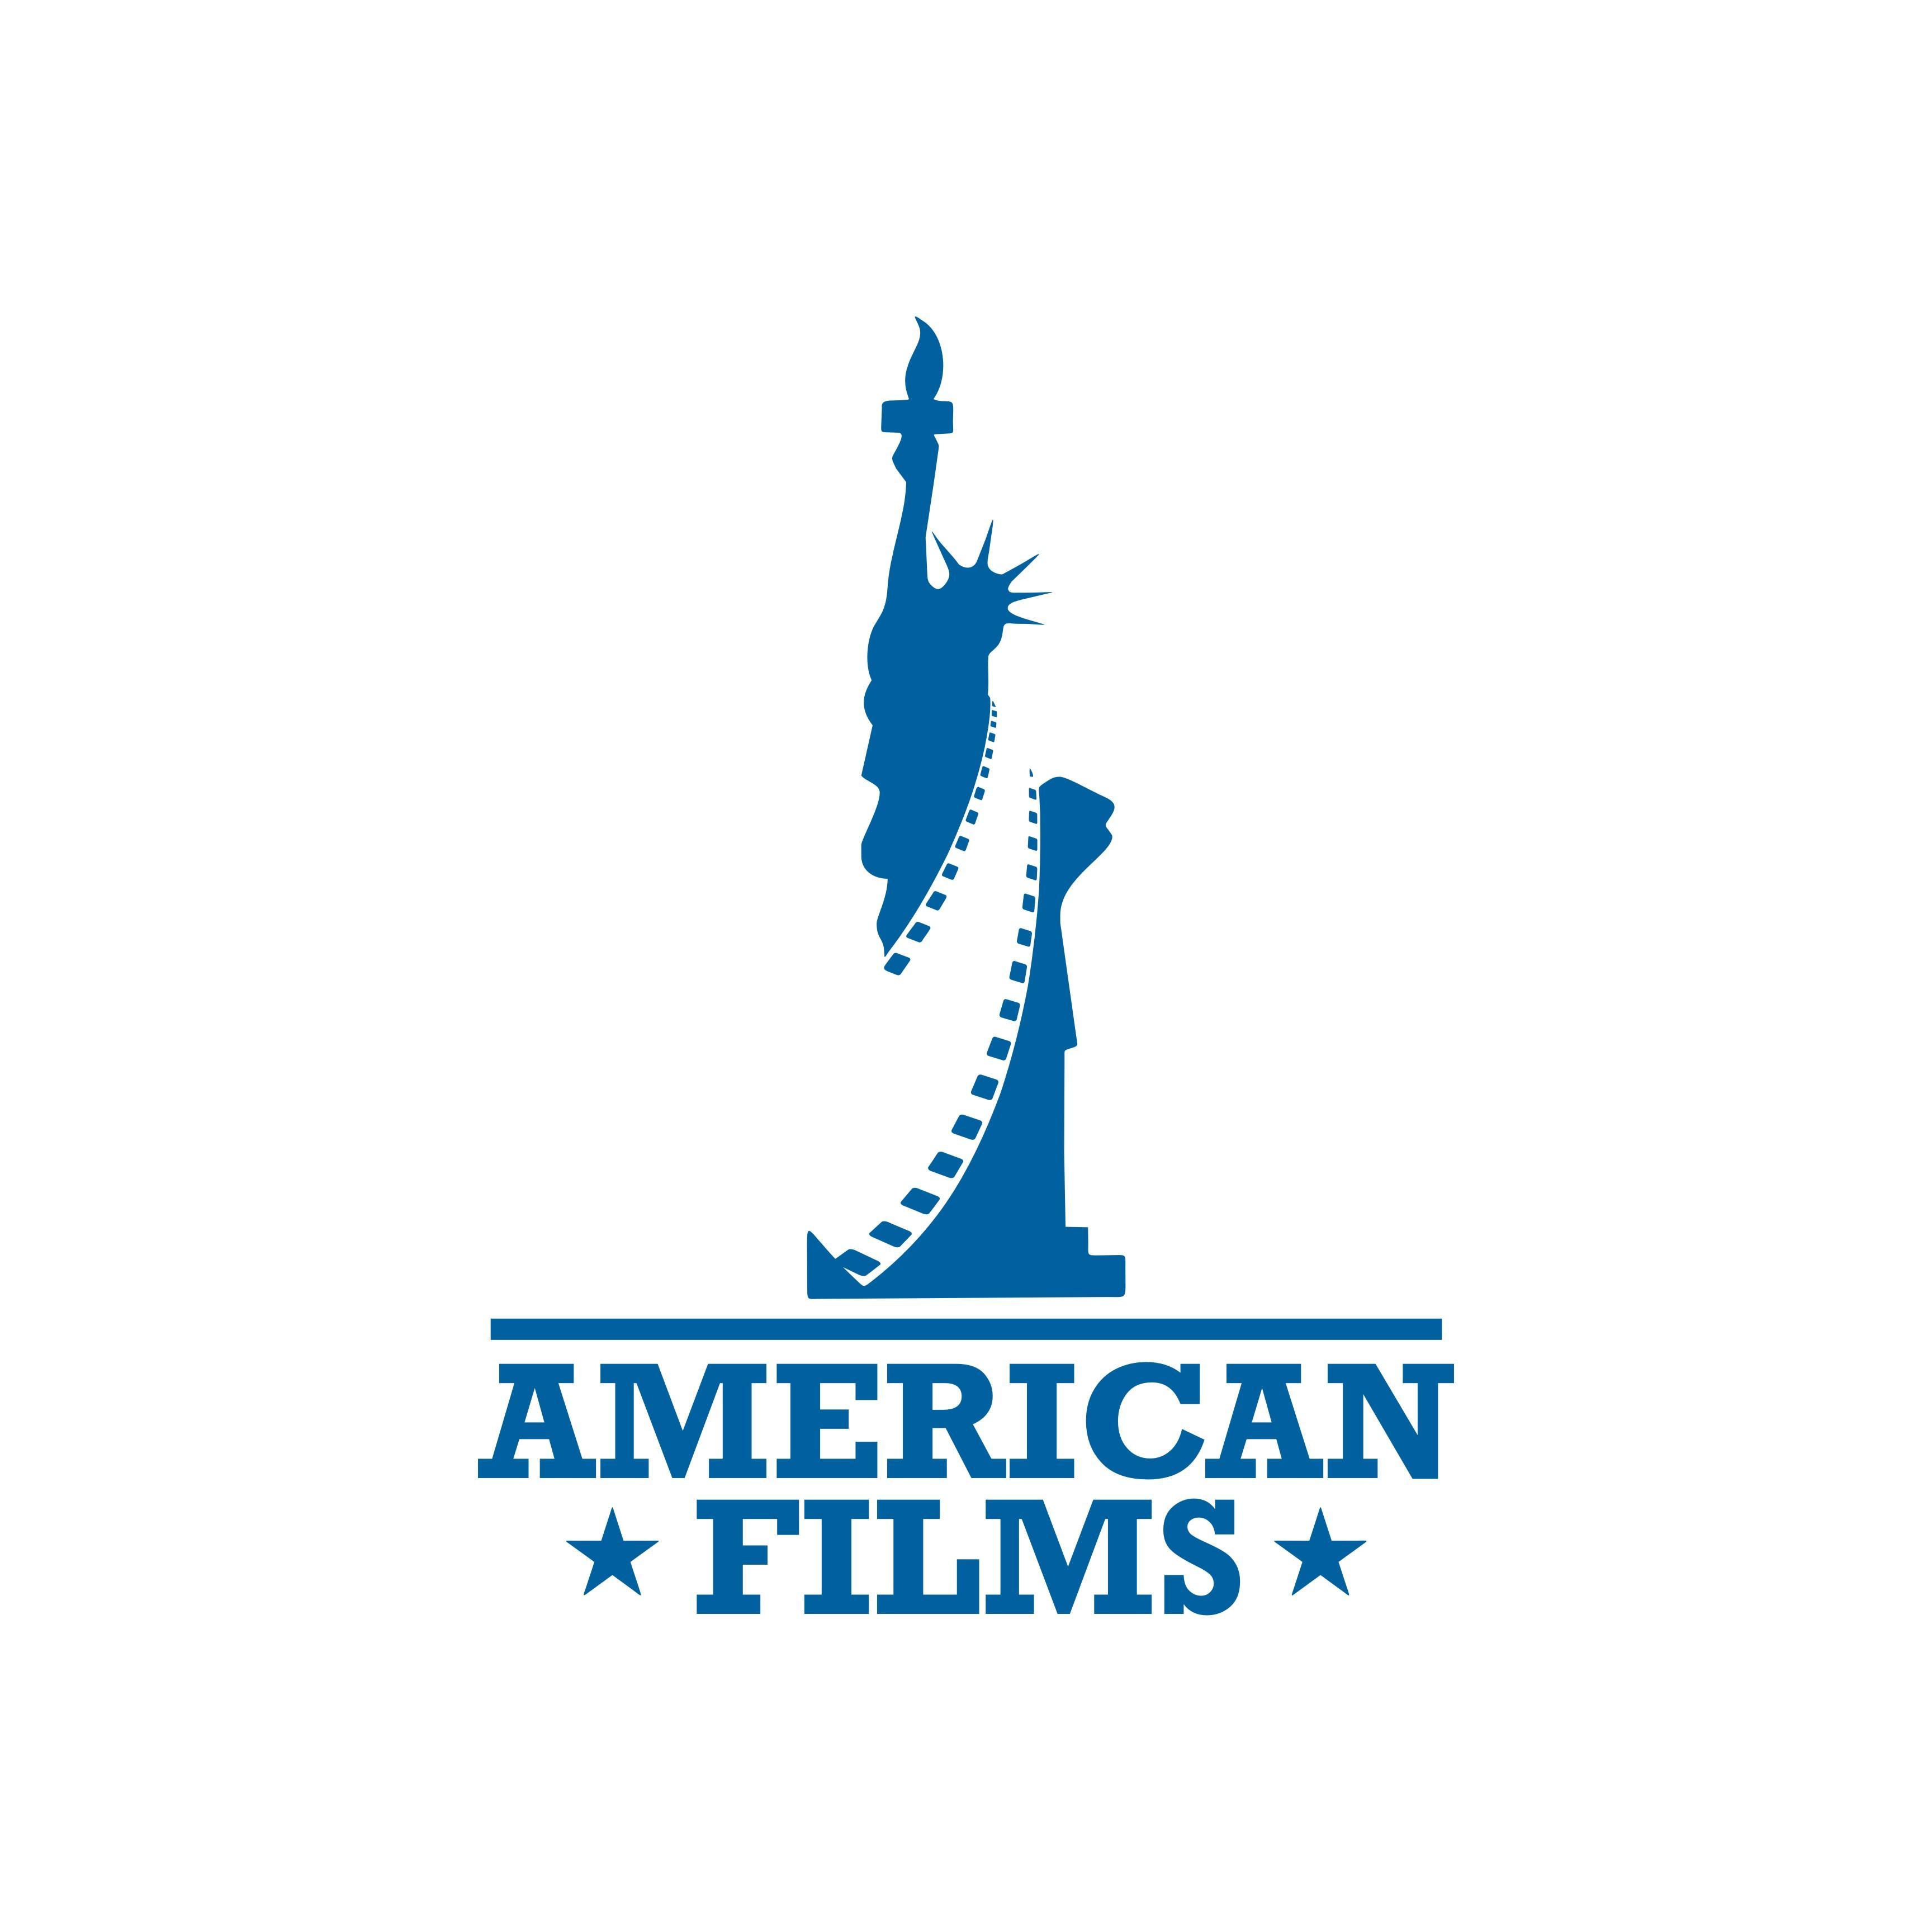 American Films ($AMFL) offers film and music copyright ©️ owners protection from online piracy and damage recovery through DMCA notices and other methods.